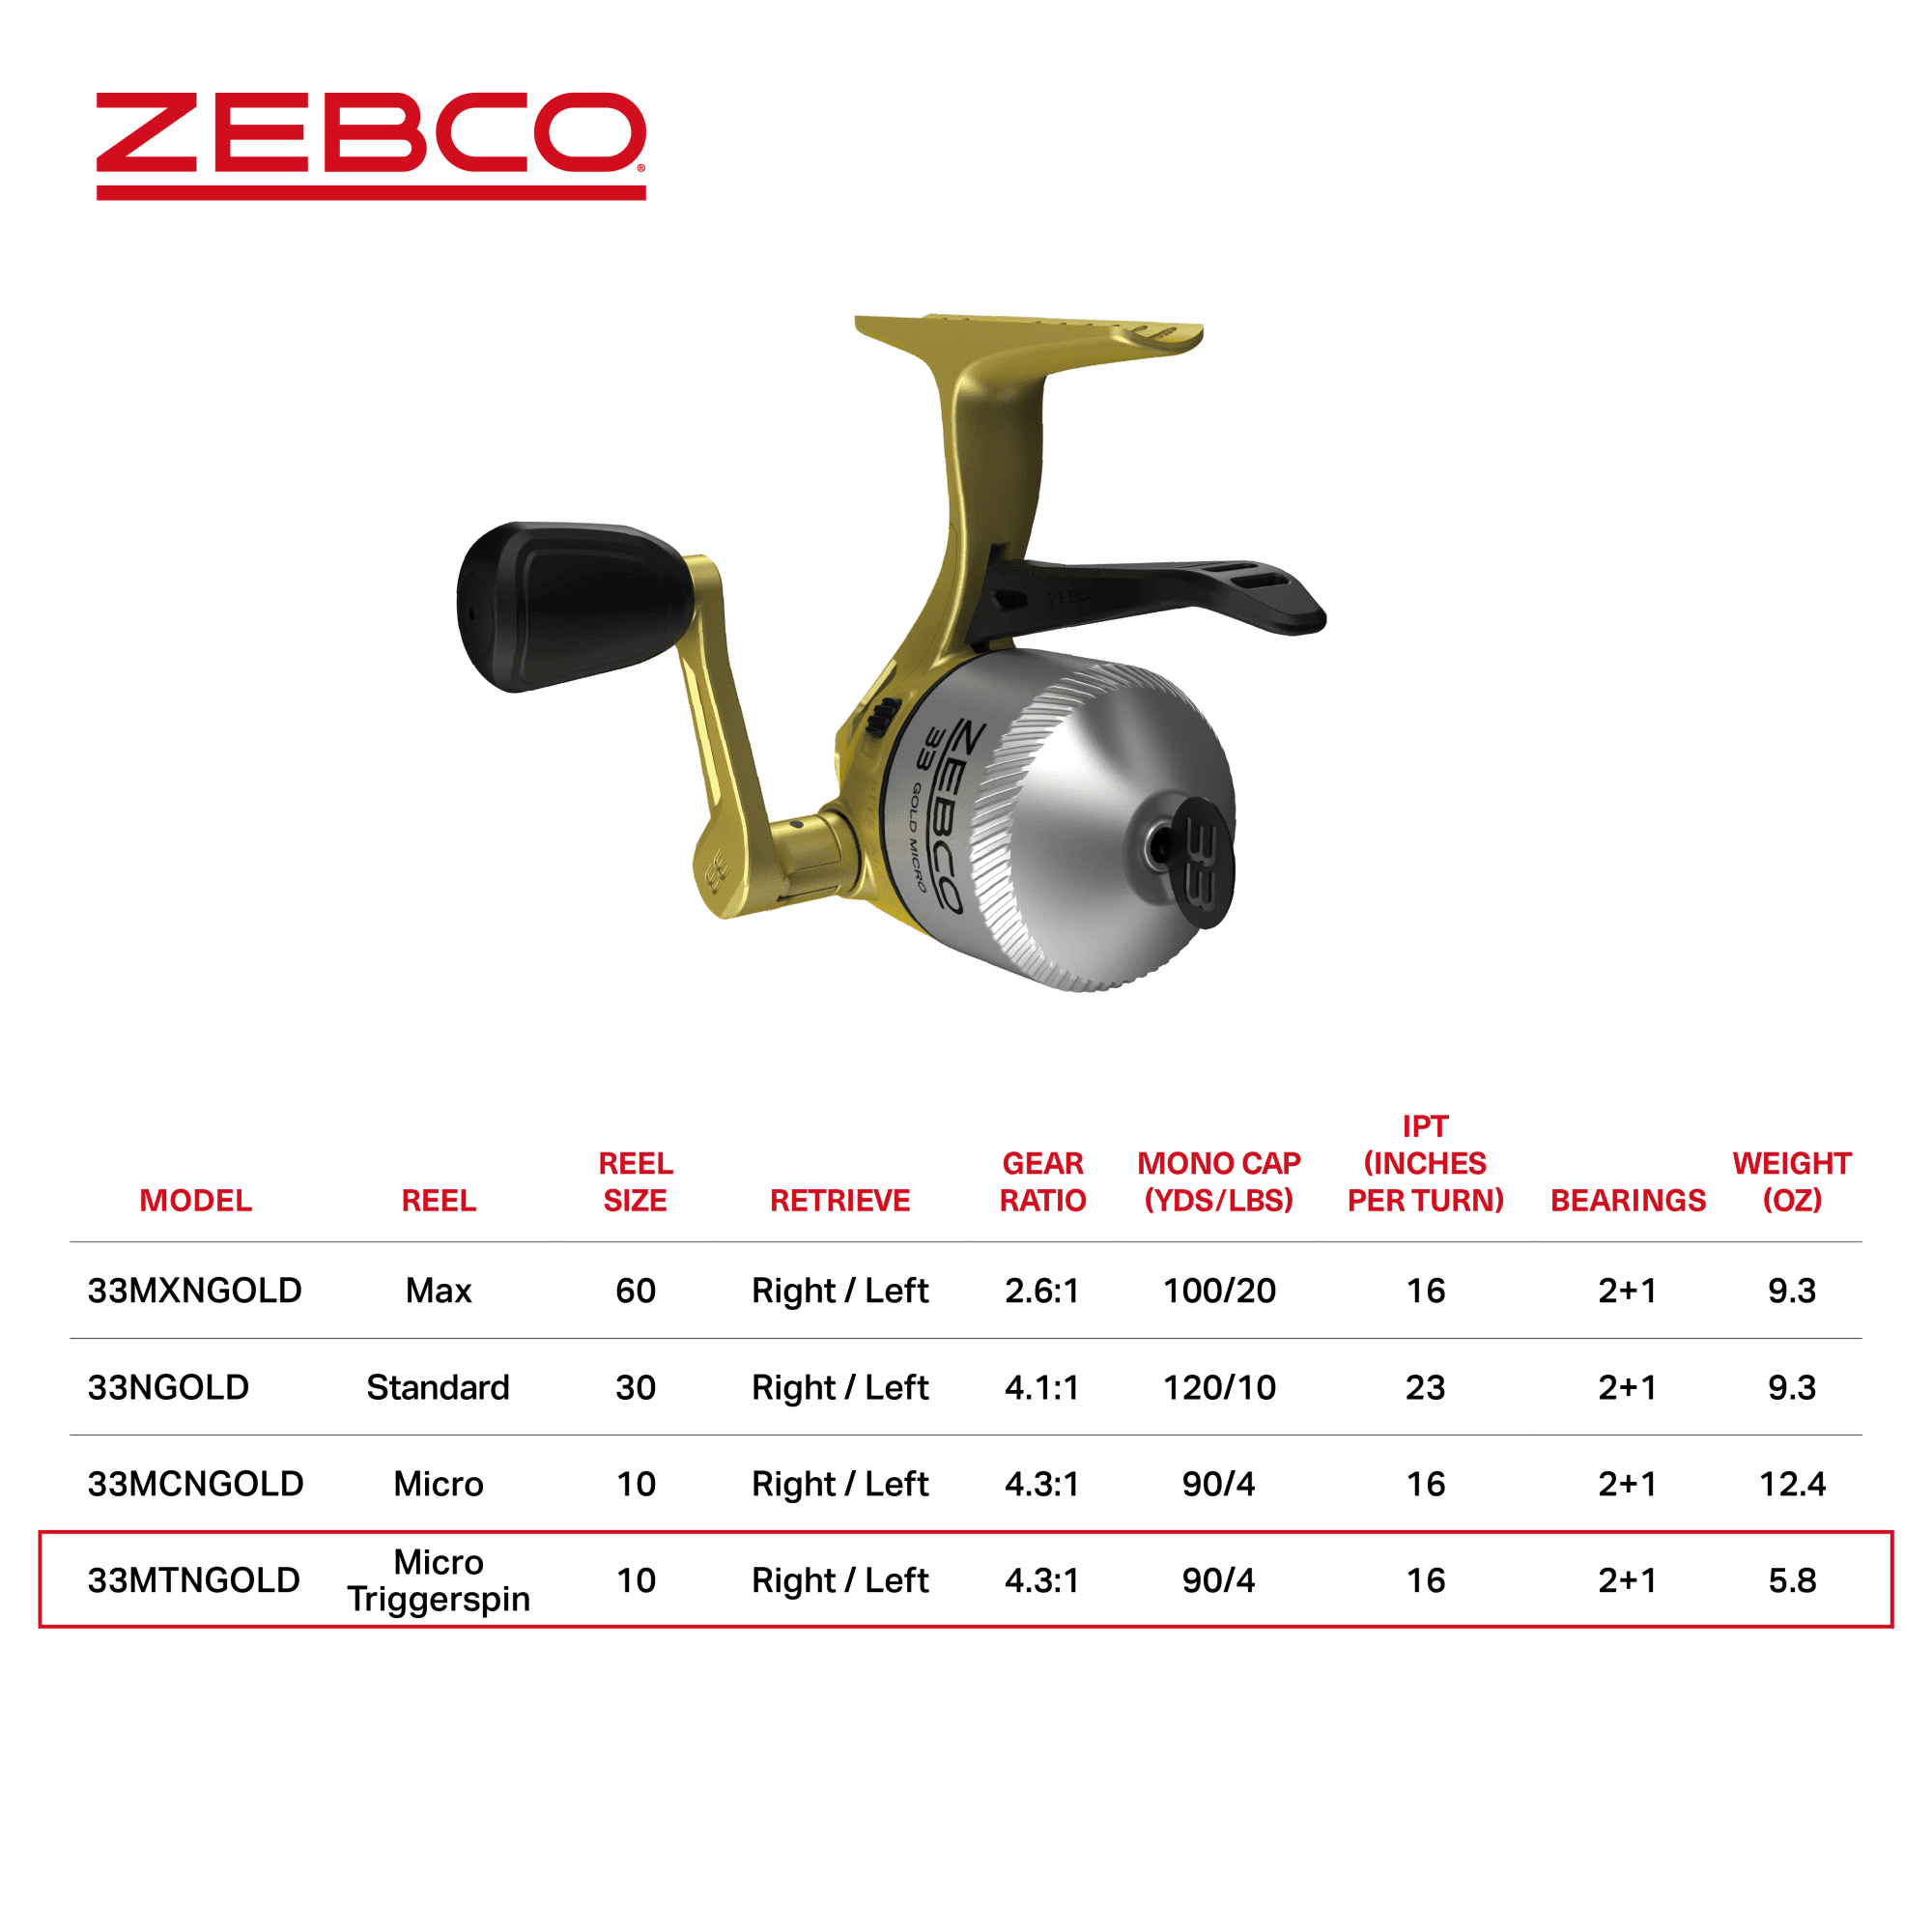 Zebco 33 Gold Micro Trigger Spincast Fishing Reel, Size 10 Reel,  Silver/Gold 